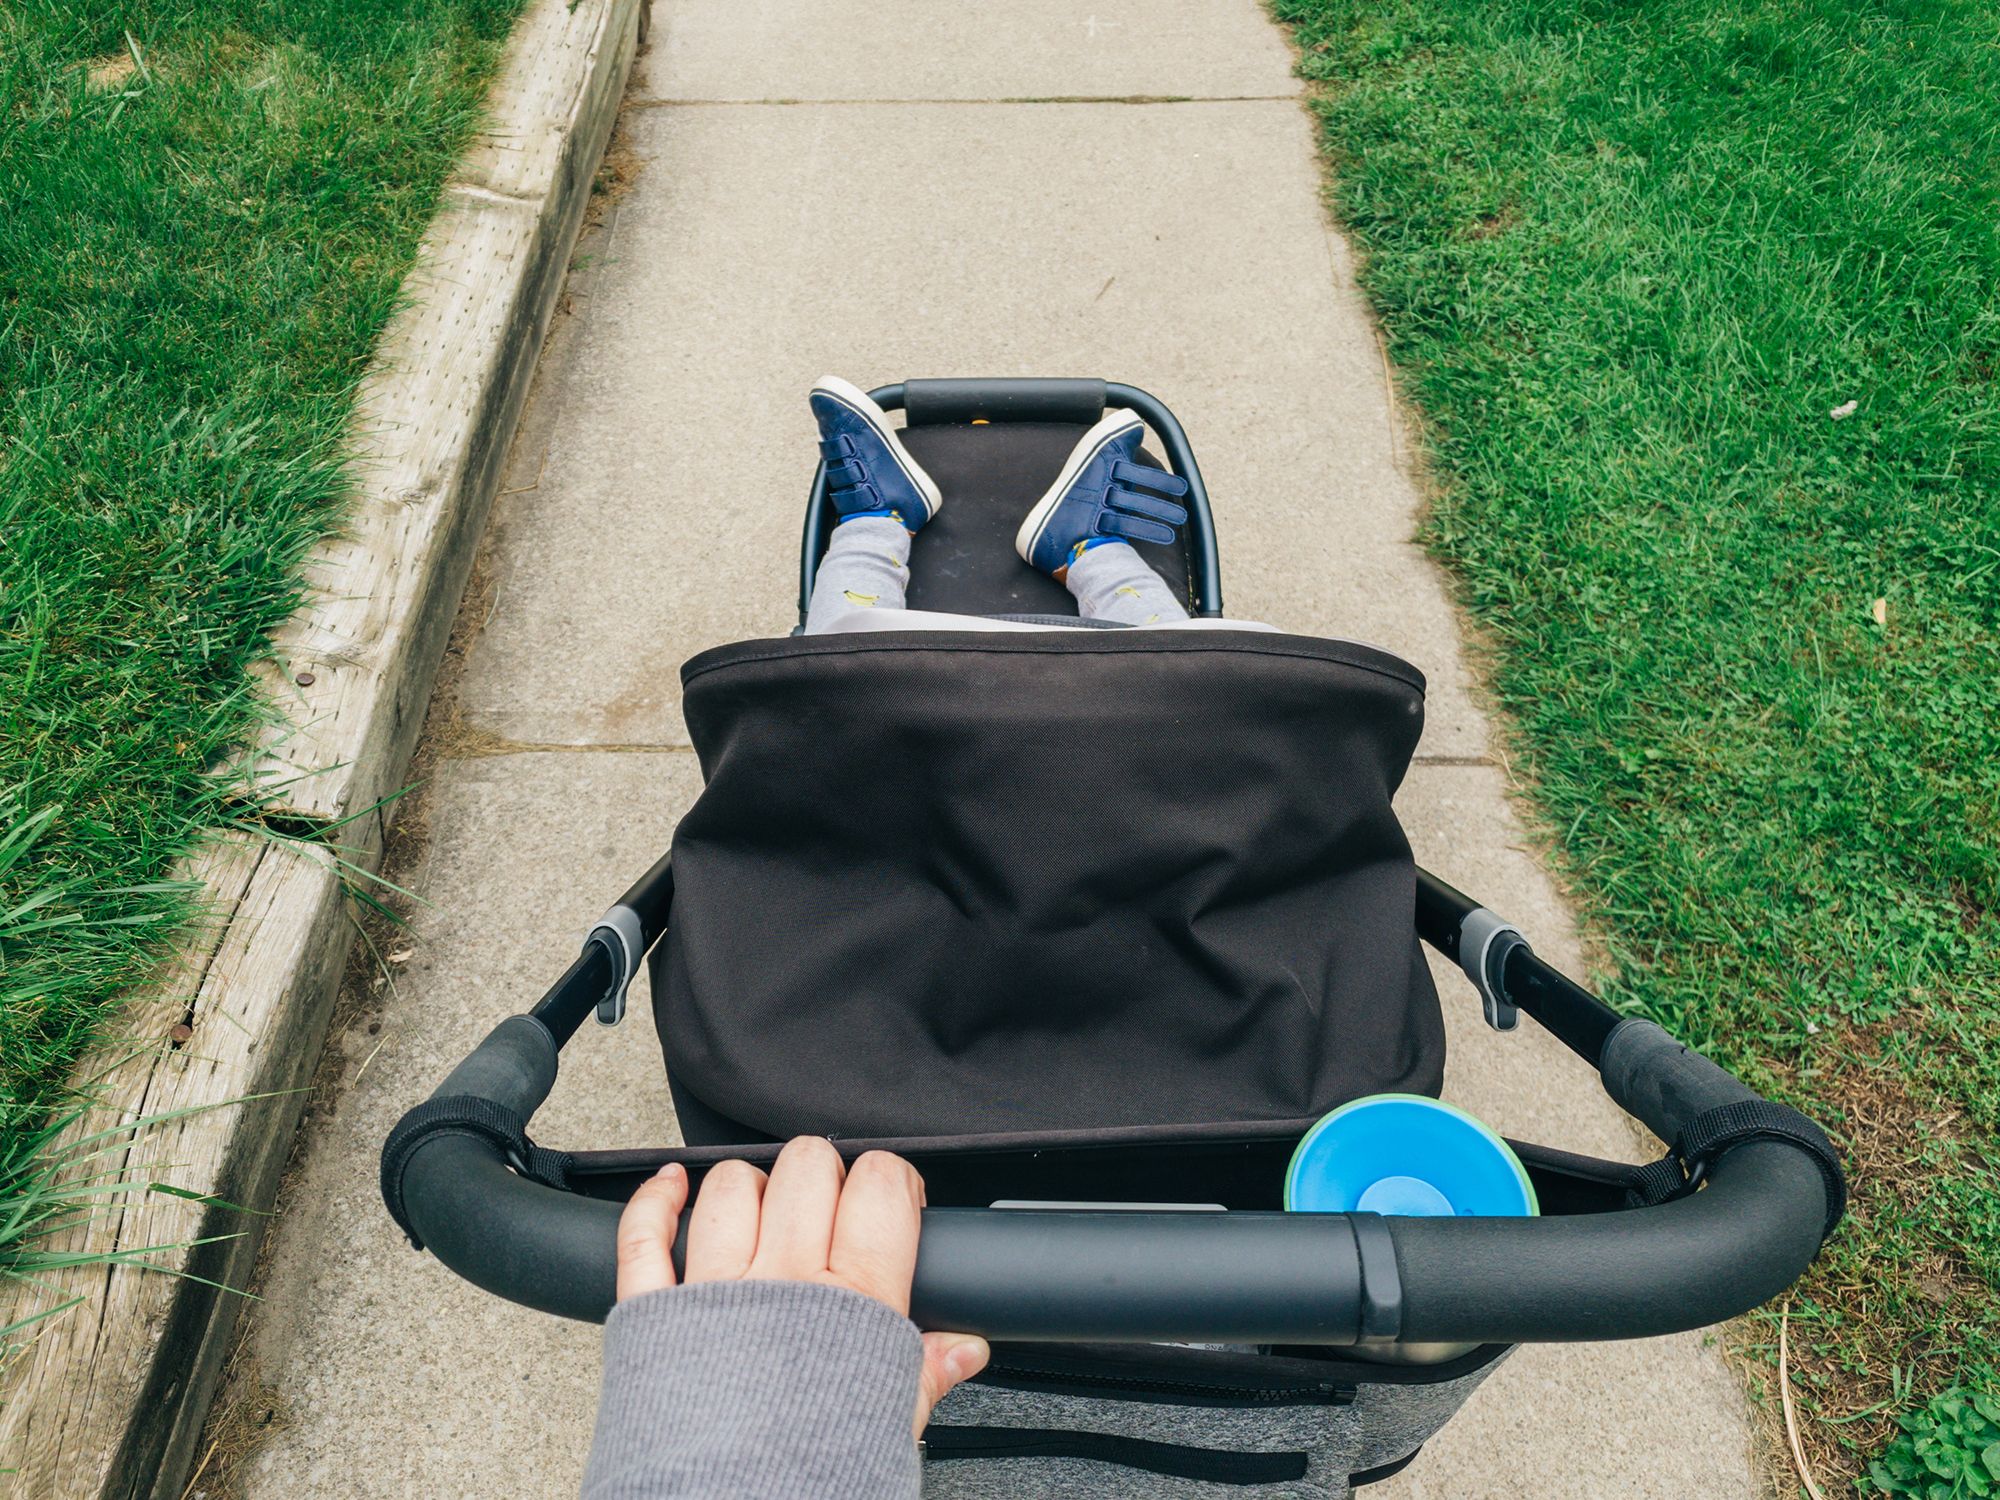 10 Best Stroller Accessories of 2021 - Baby Accessories, Toys, and Hooks